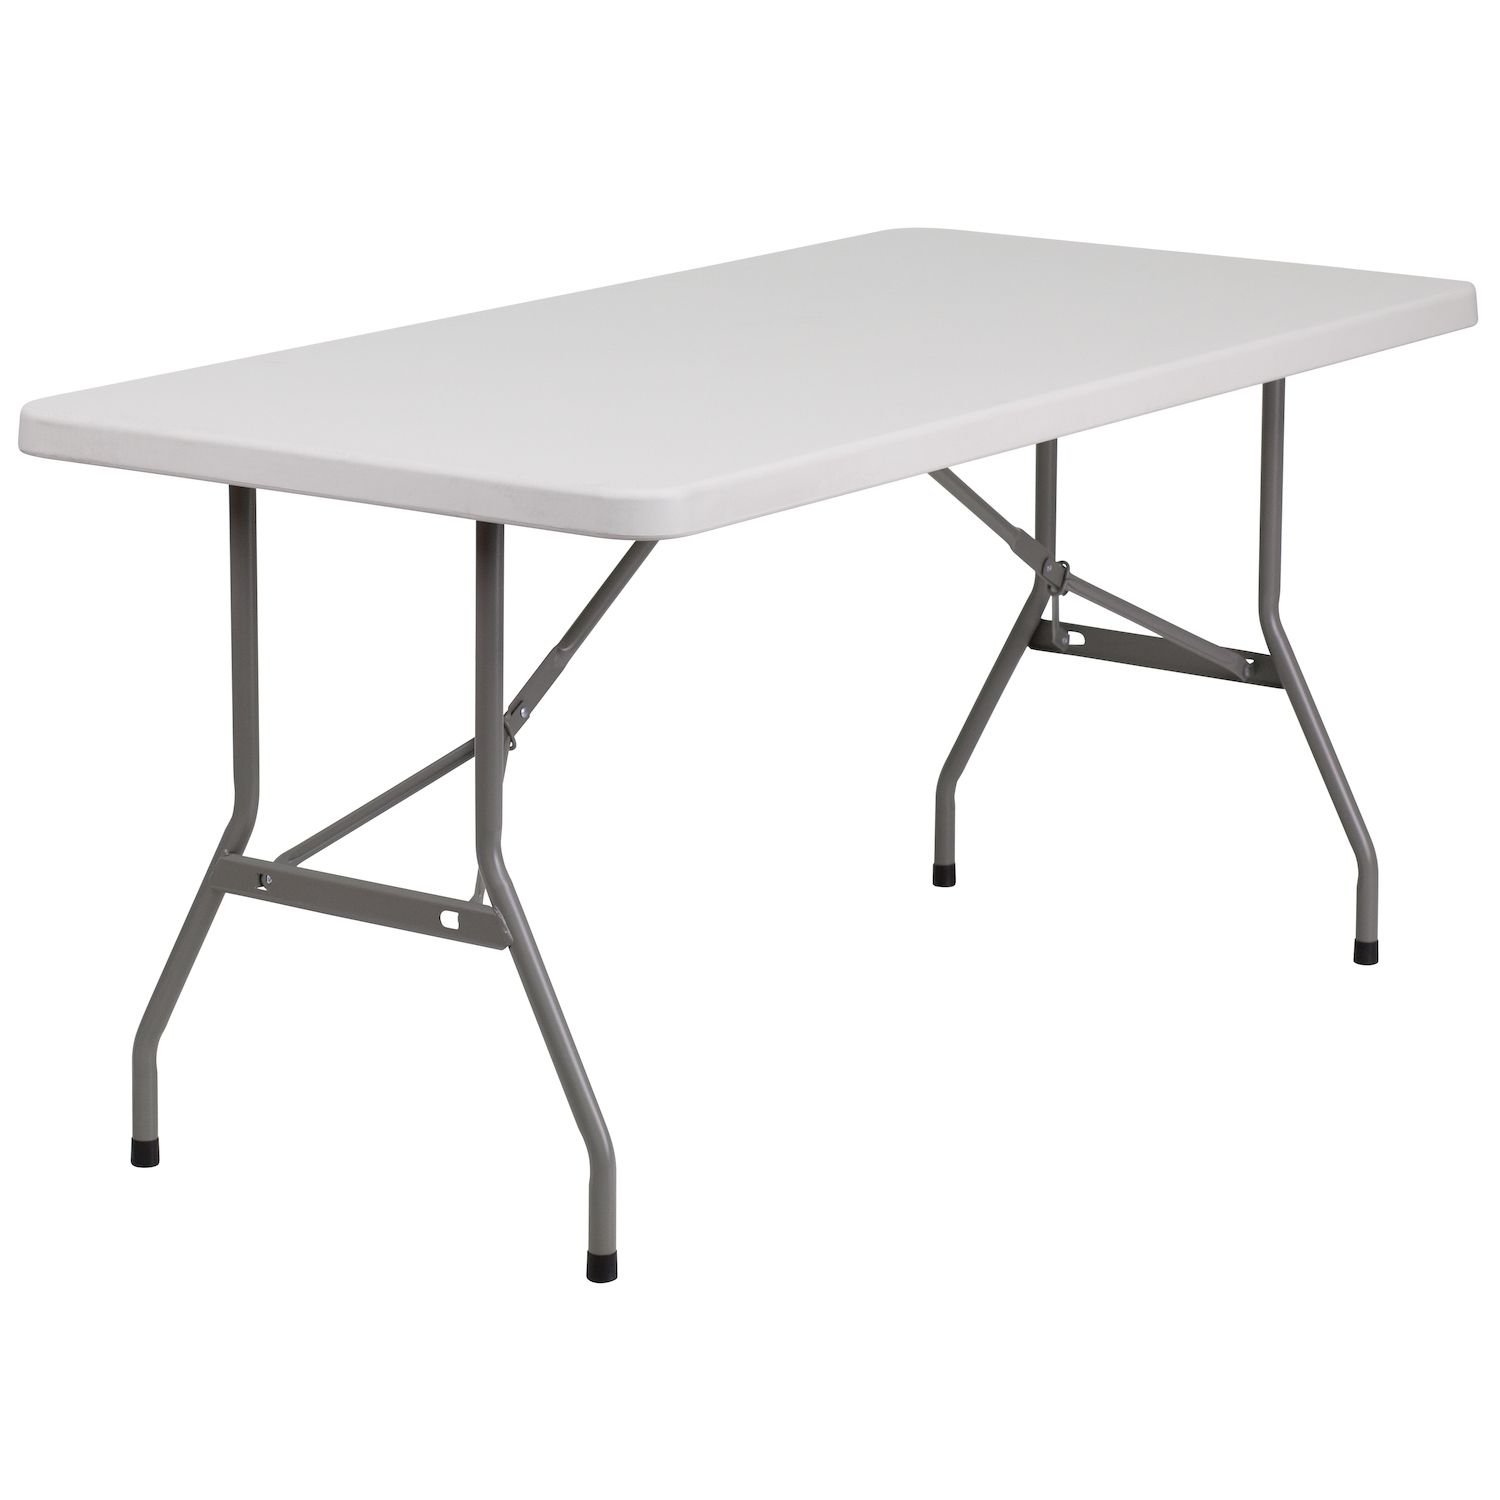 My Business - Folding Tables